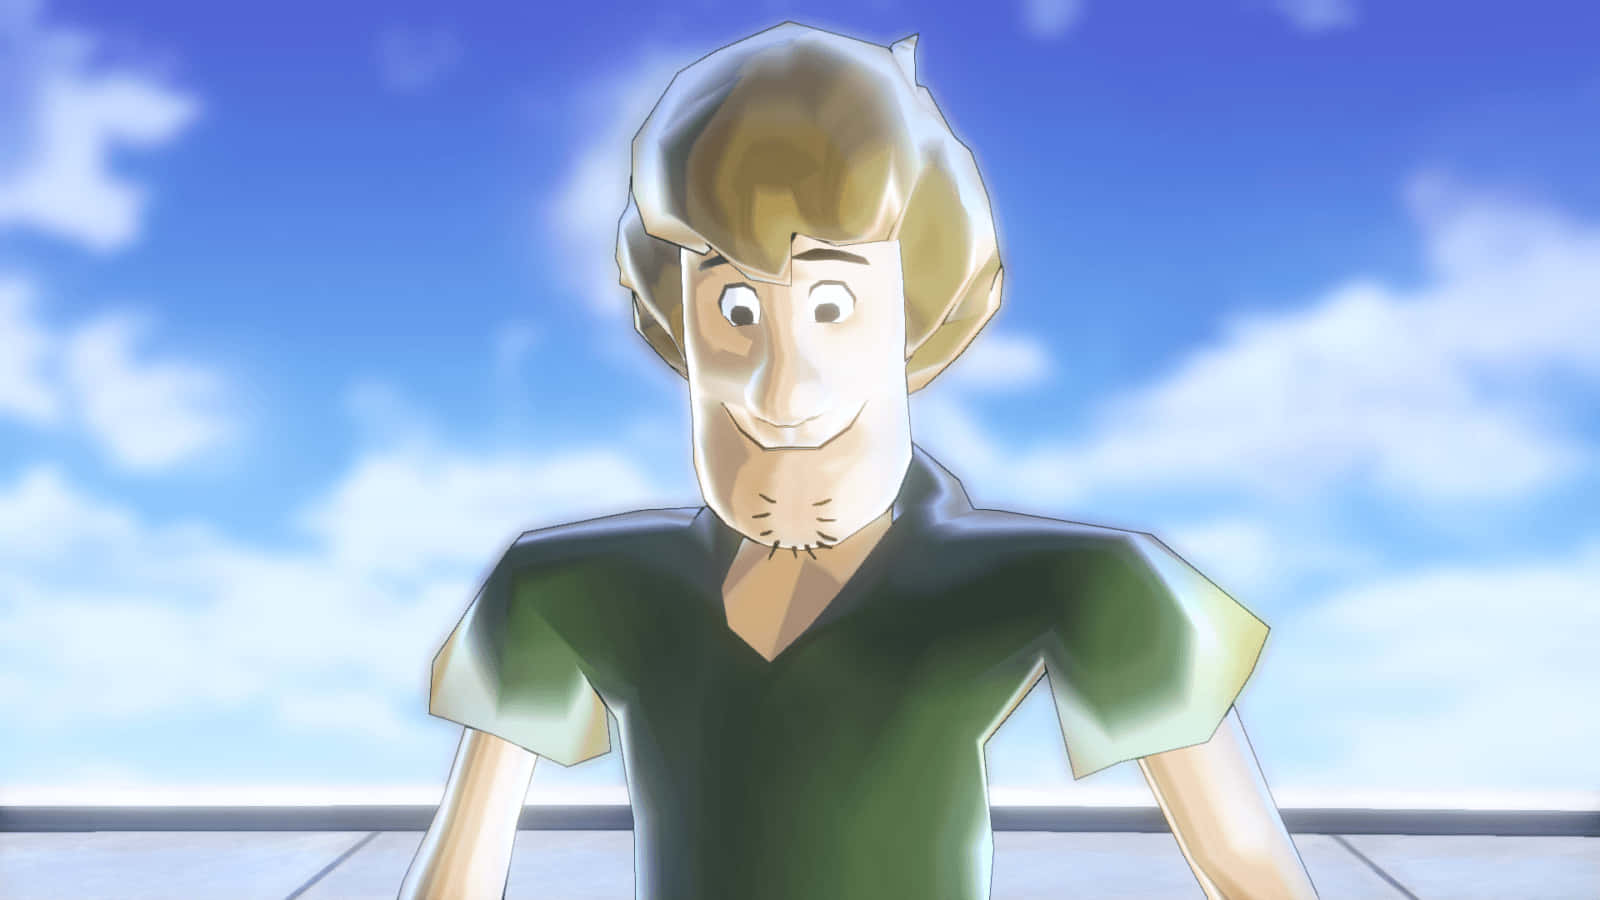 Shaggy Rogers, the lovable character from Scooby-Doo Wallpaper